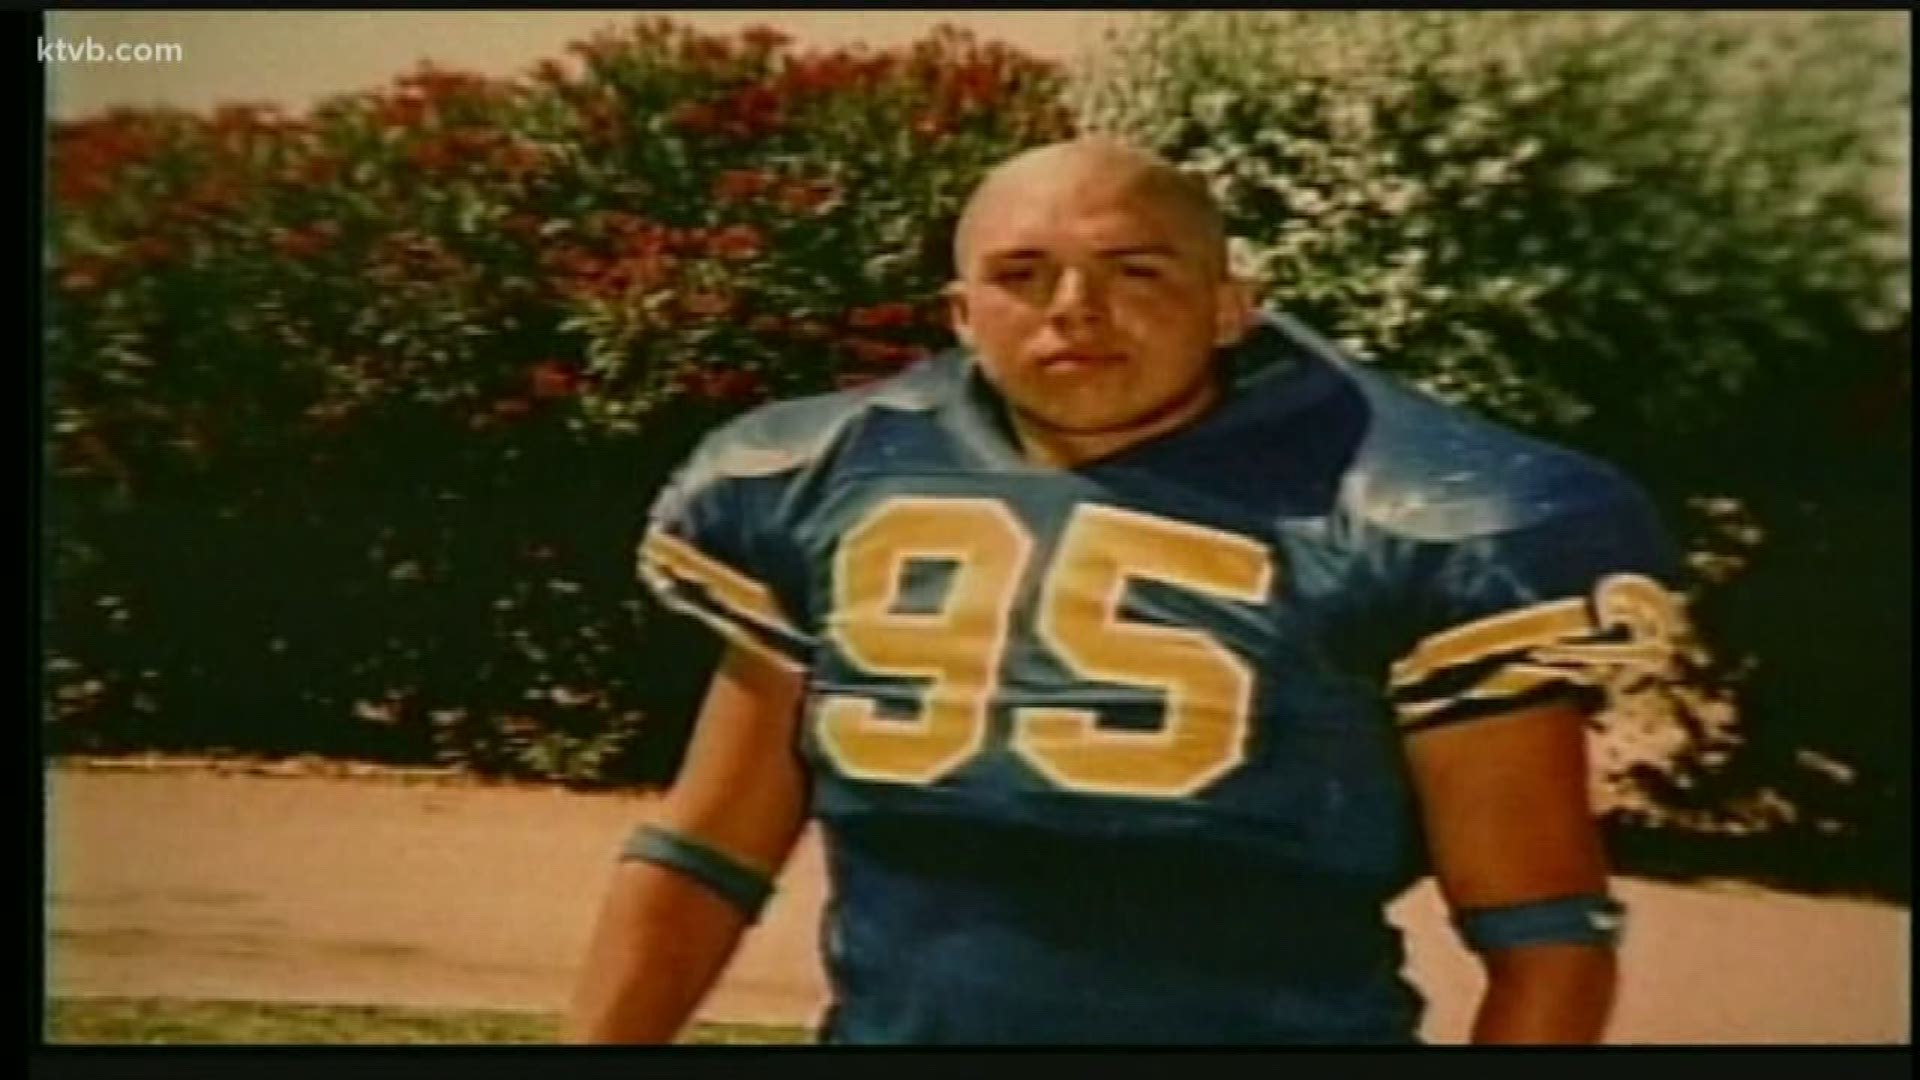 Freshman defensive tackle Paul Reyna died from a head injury he sustained during a preseason scrimmage game in 1999.